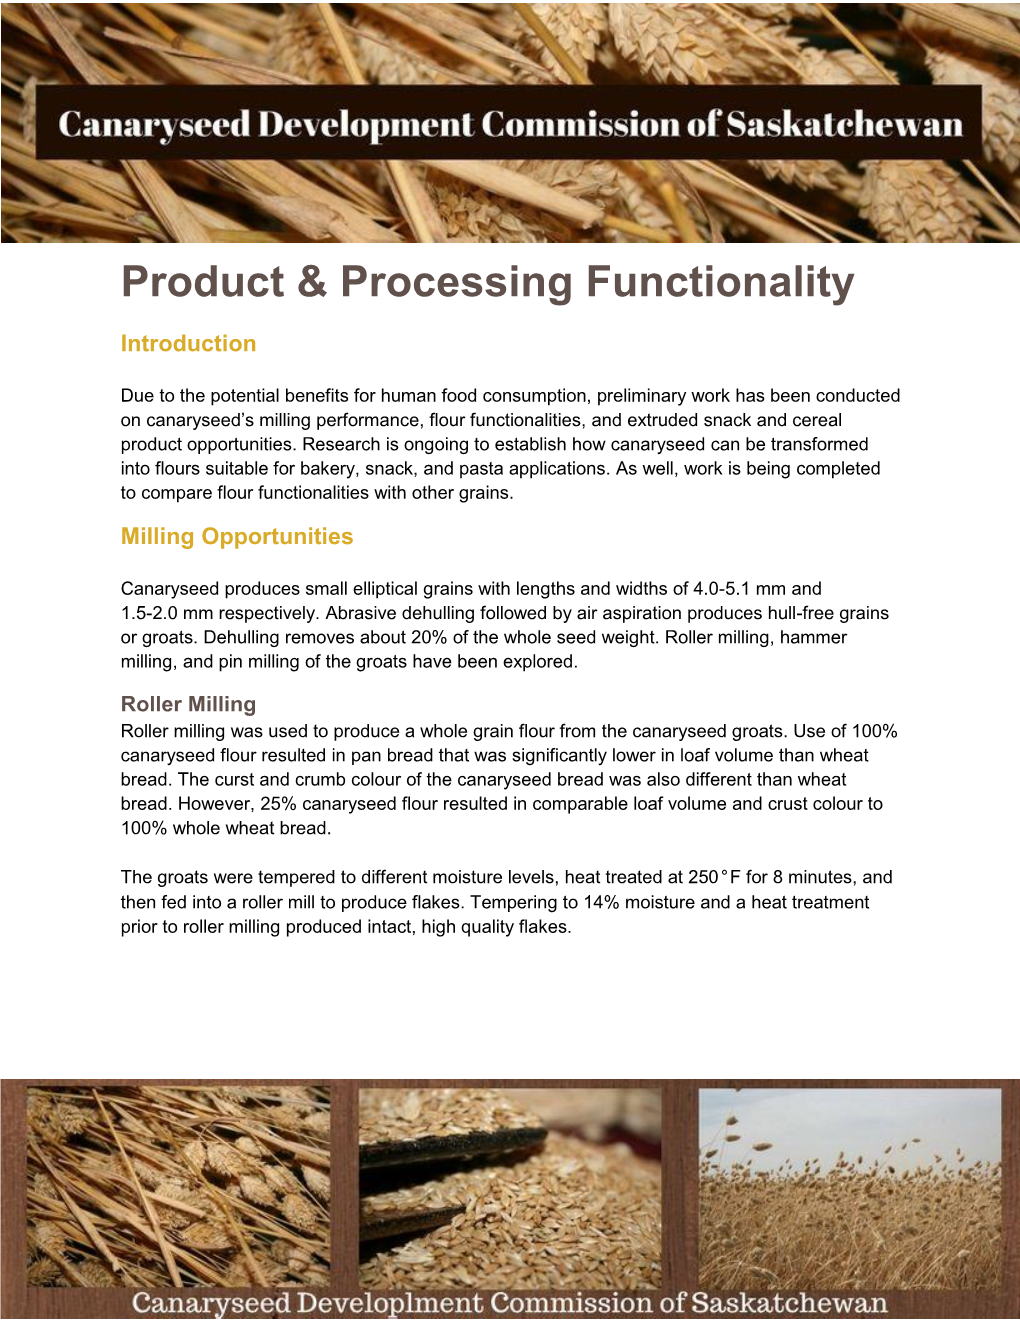 Product & Processing Functionality